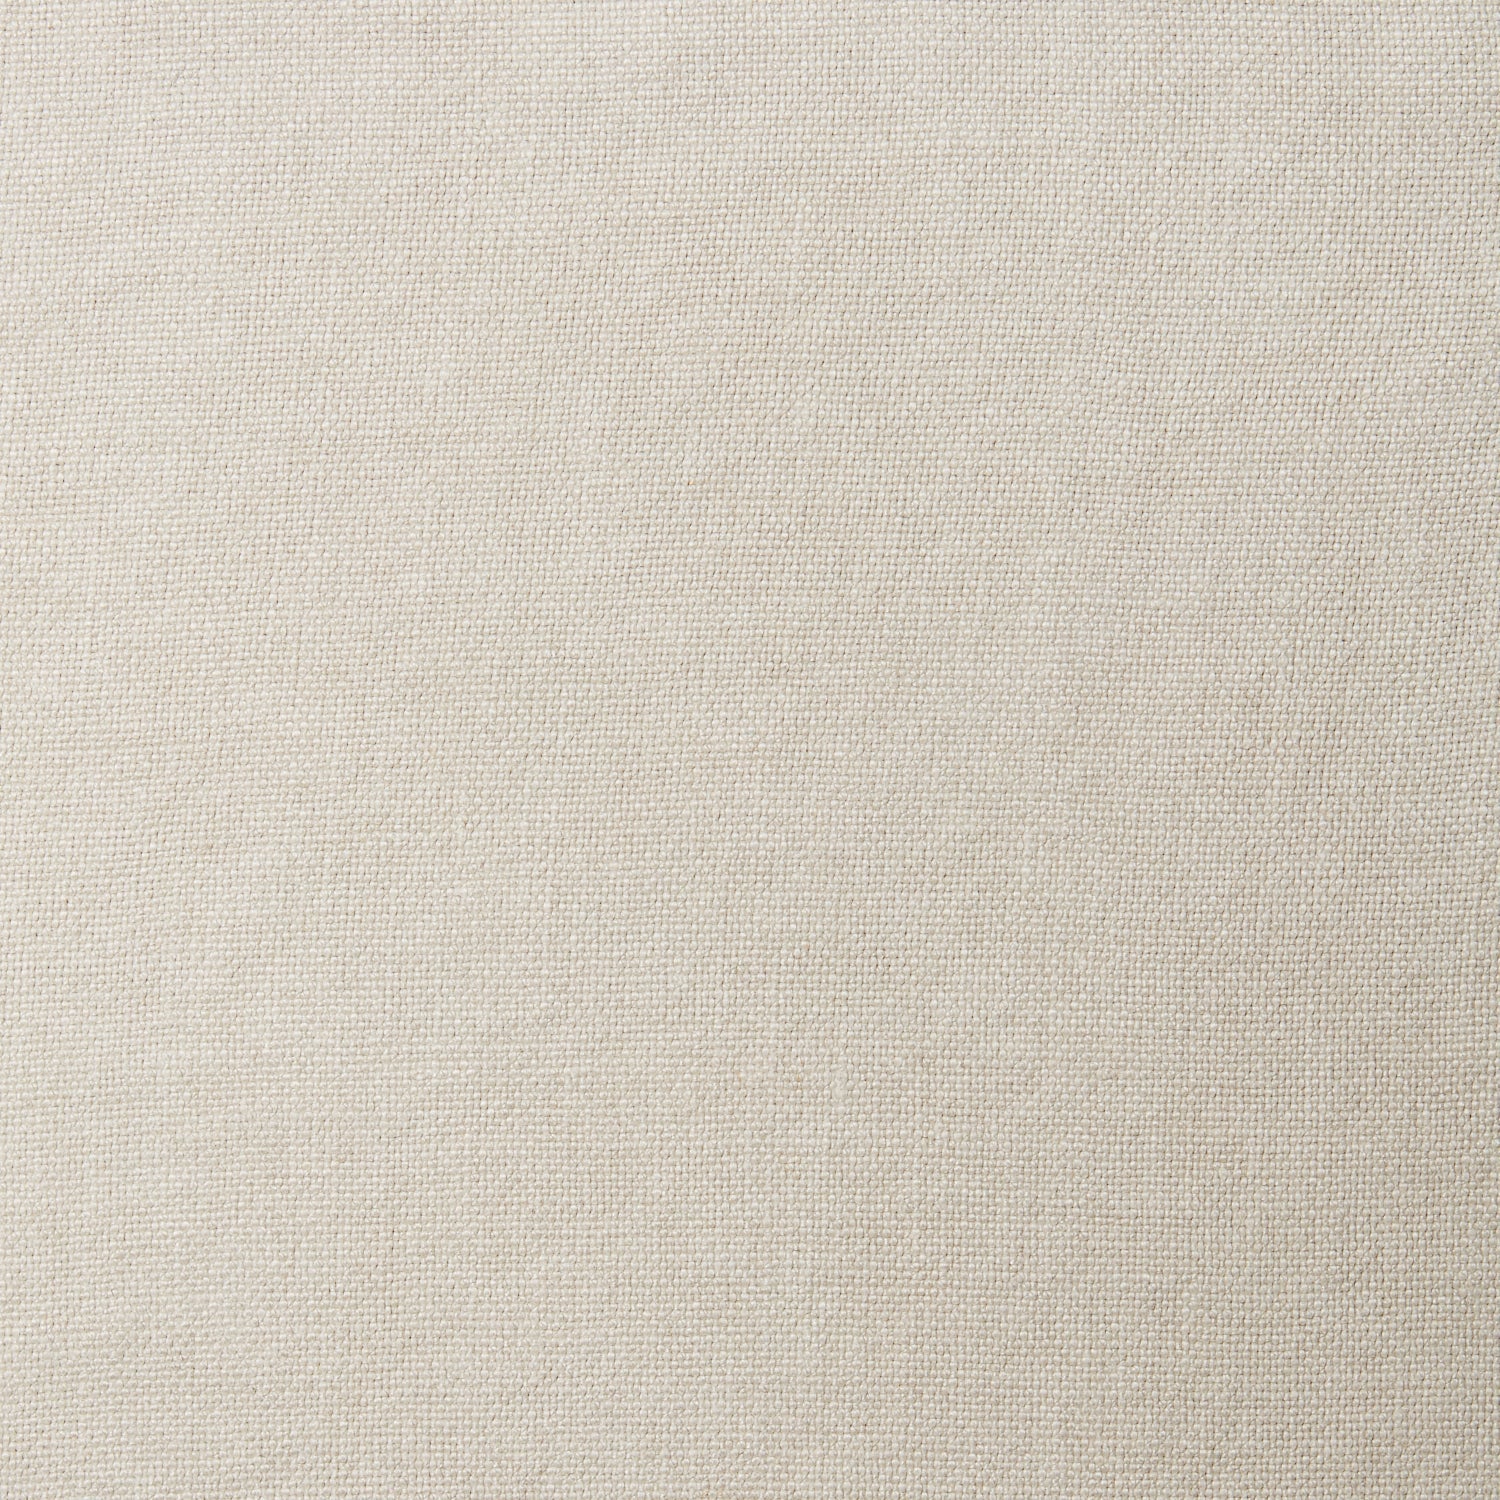 A swatch of old-world linen fabric in a solid cream color.